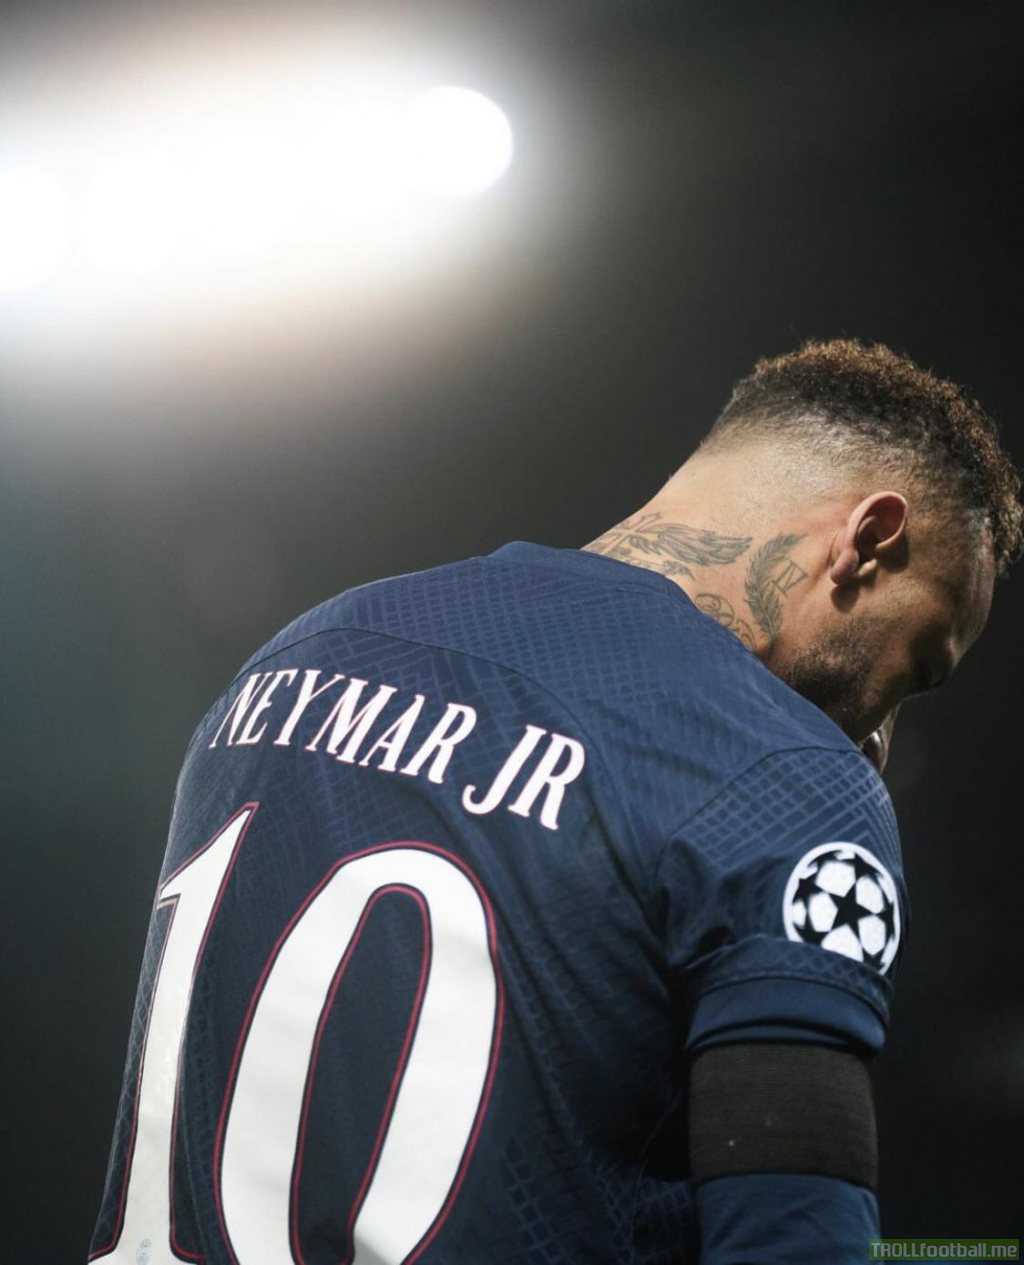 Neymar wants to stay at PSG. A source close to PSG says the meeting between Nasser & Todd Boehly did not involve Neymar but the London club wanted to apologise for the Ziyech case. @lequipe.